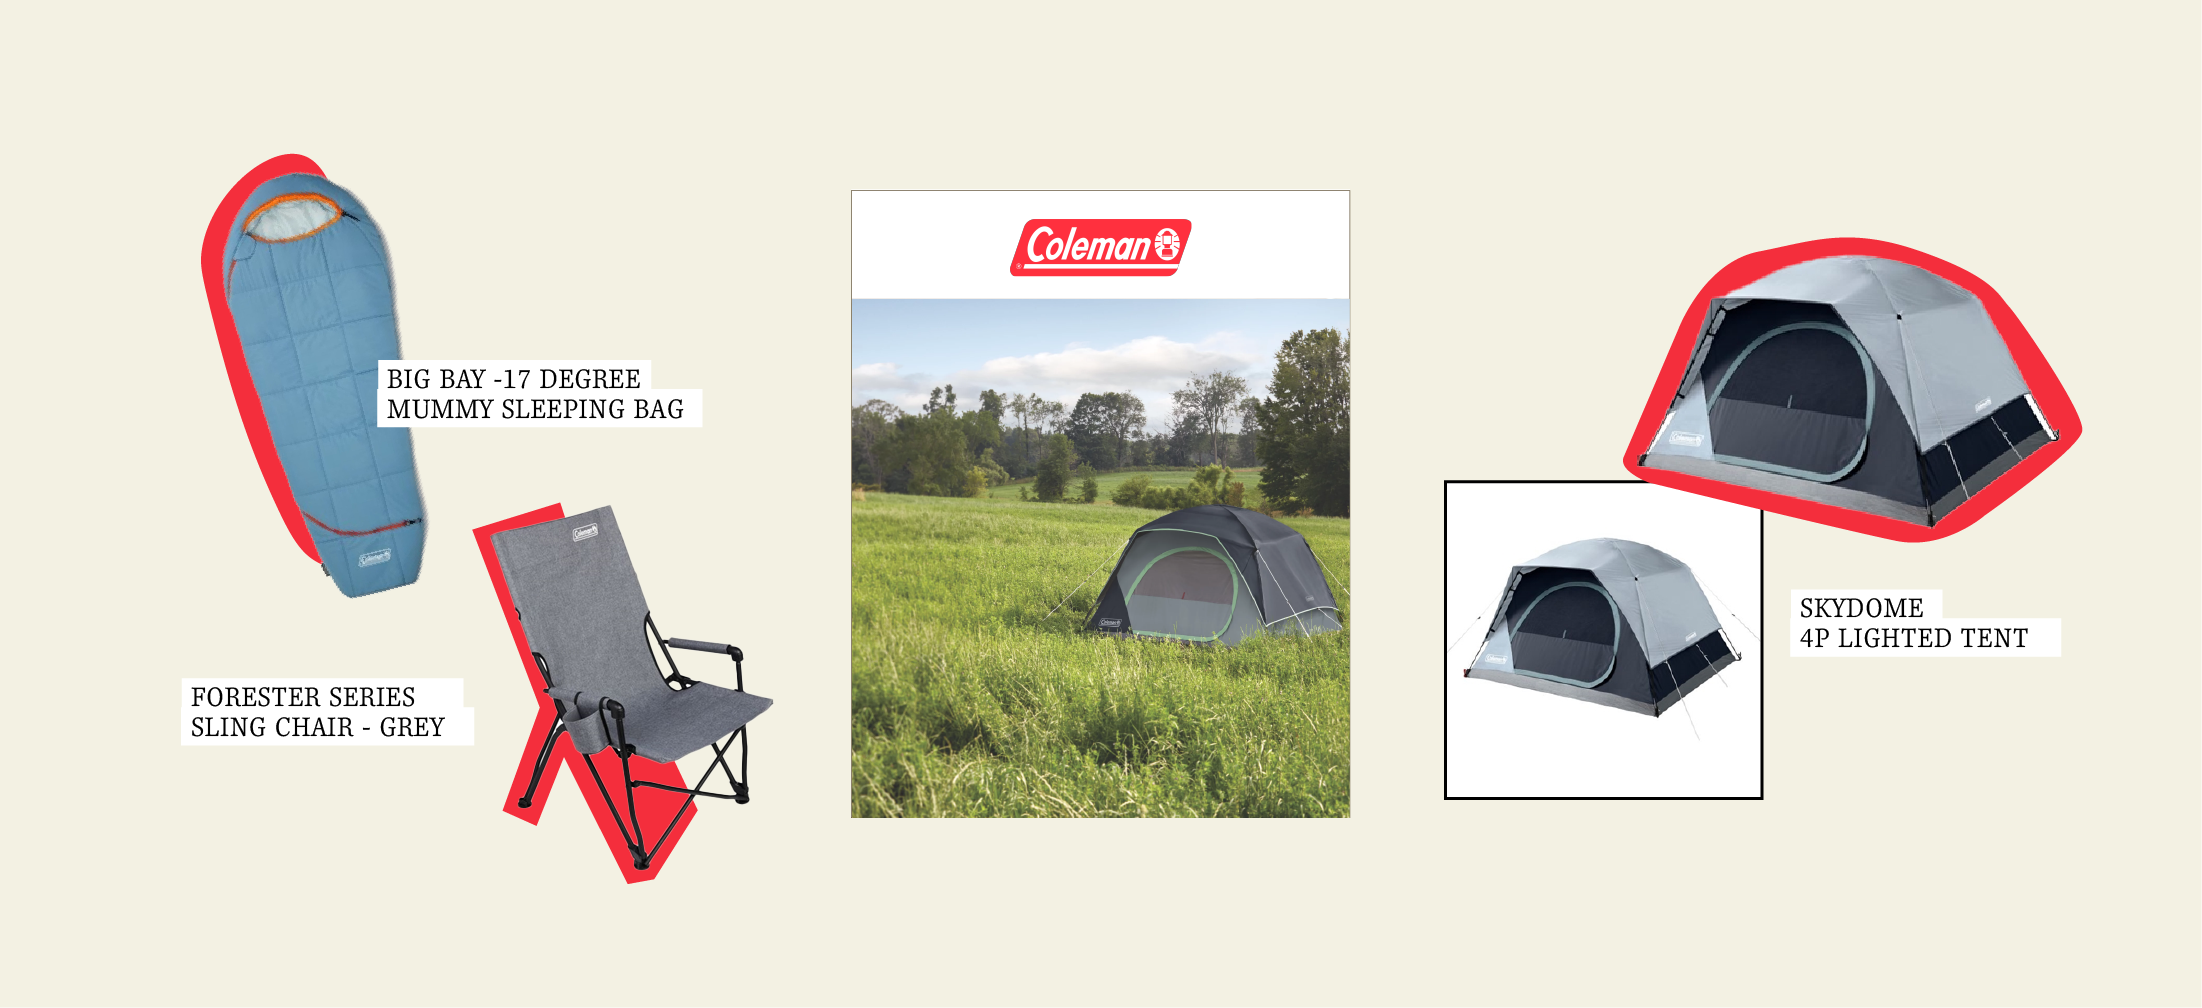 New Coleman - Great Outdoors